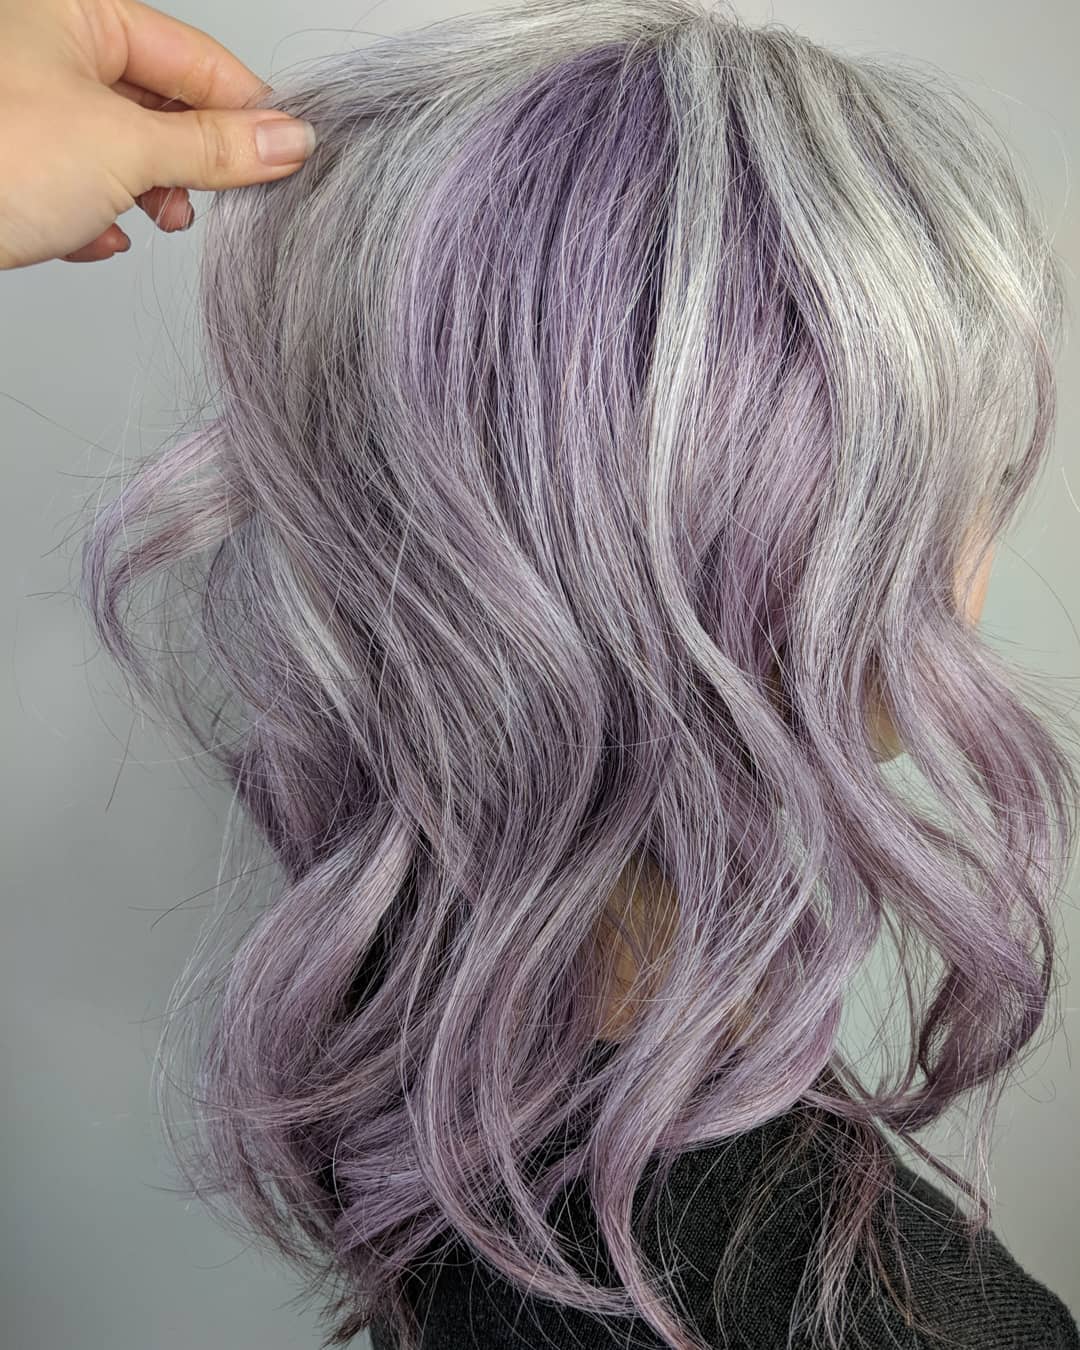 Stunning image of woman with lavender hair